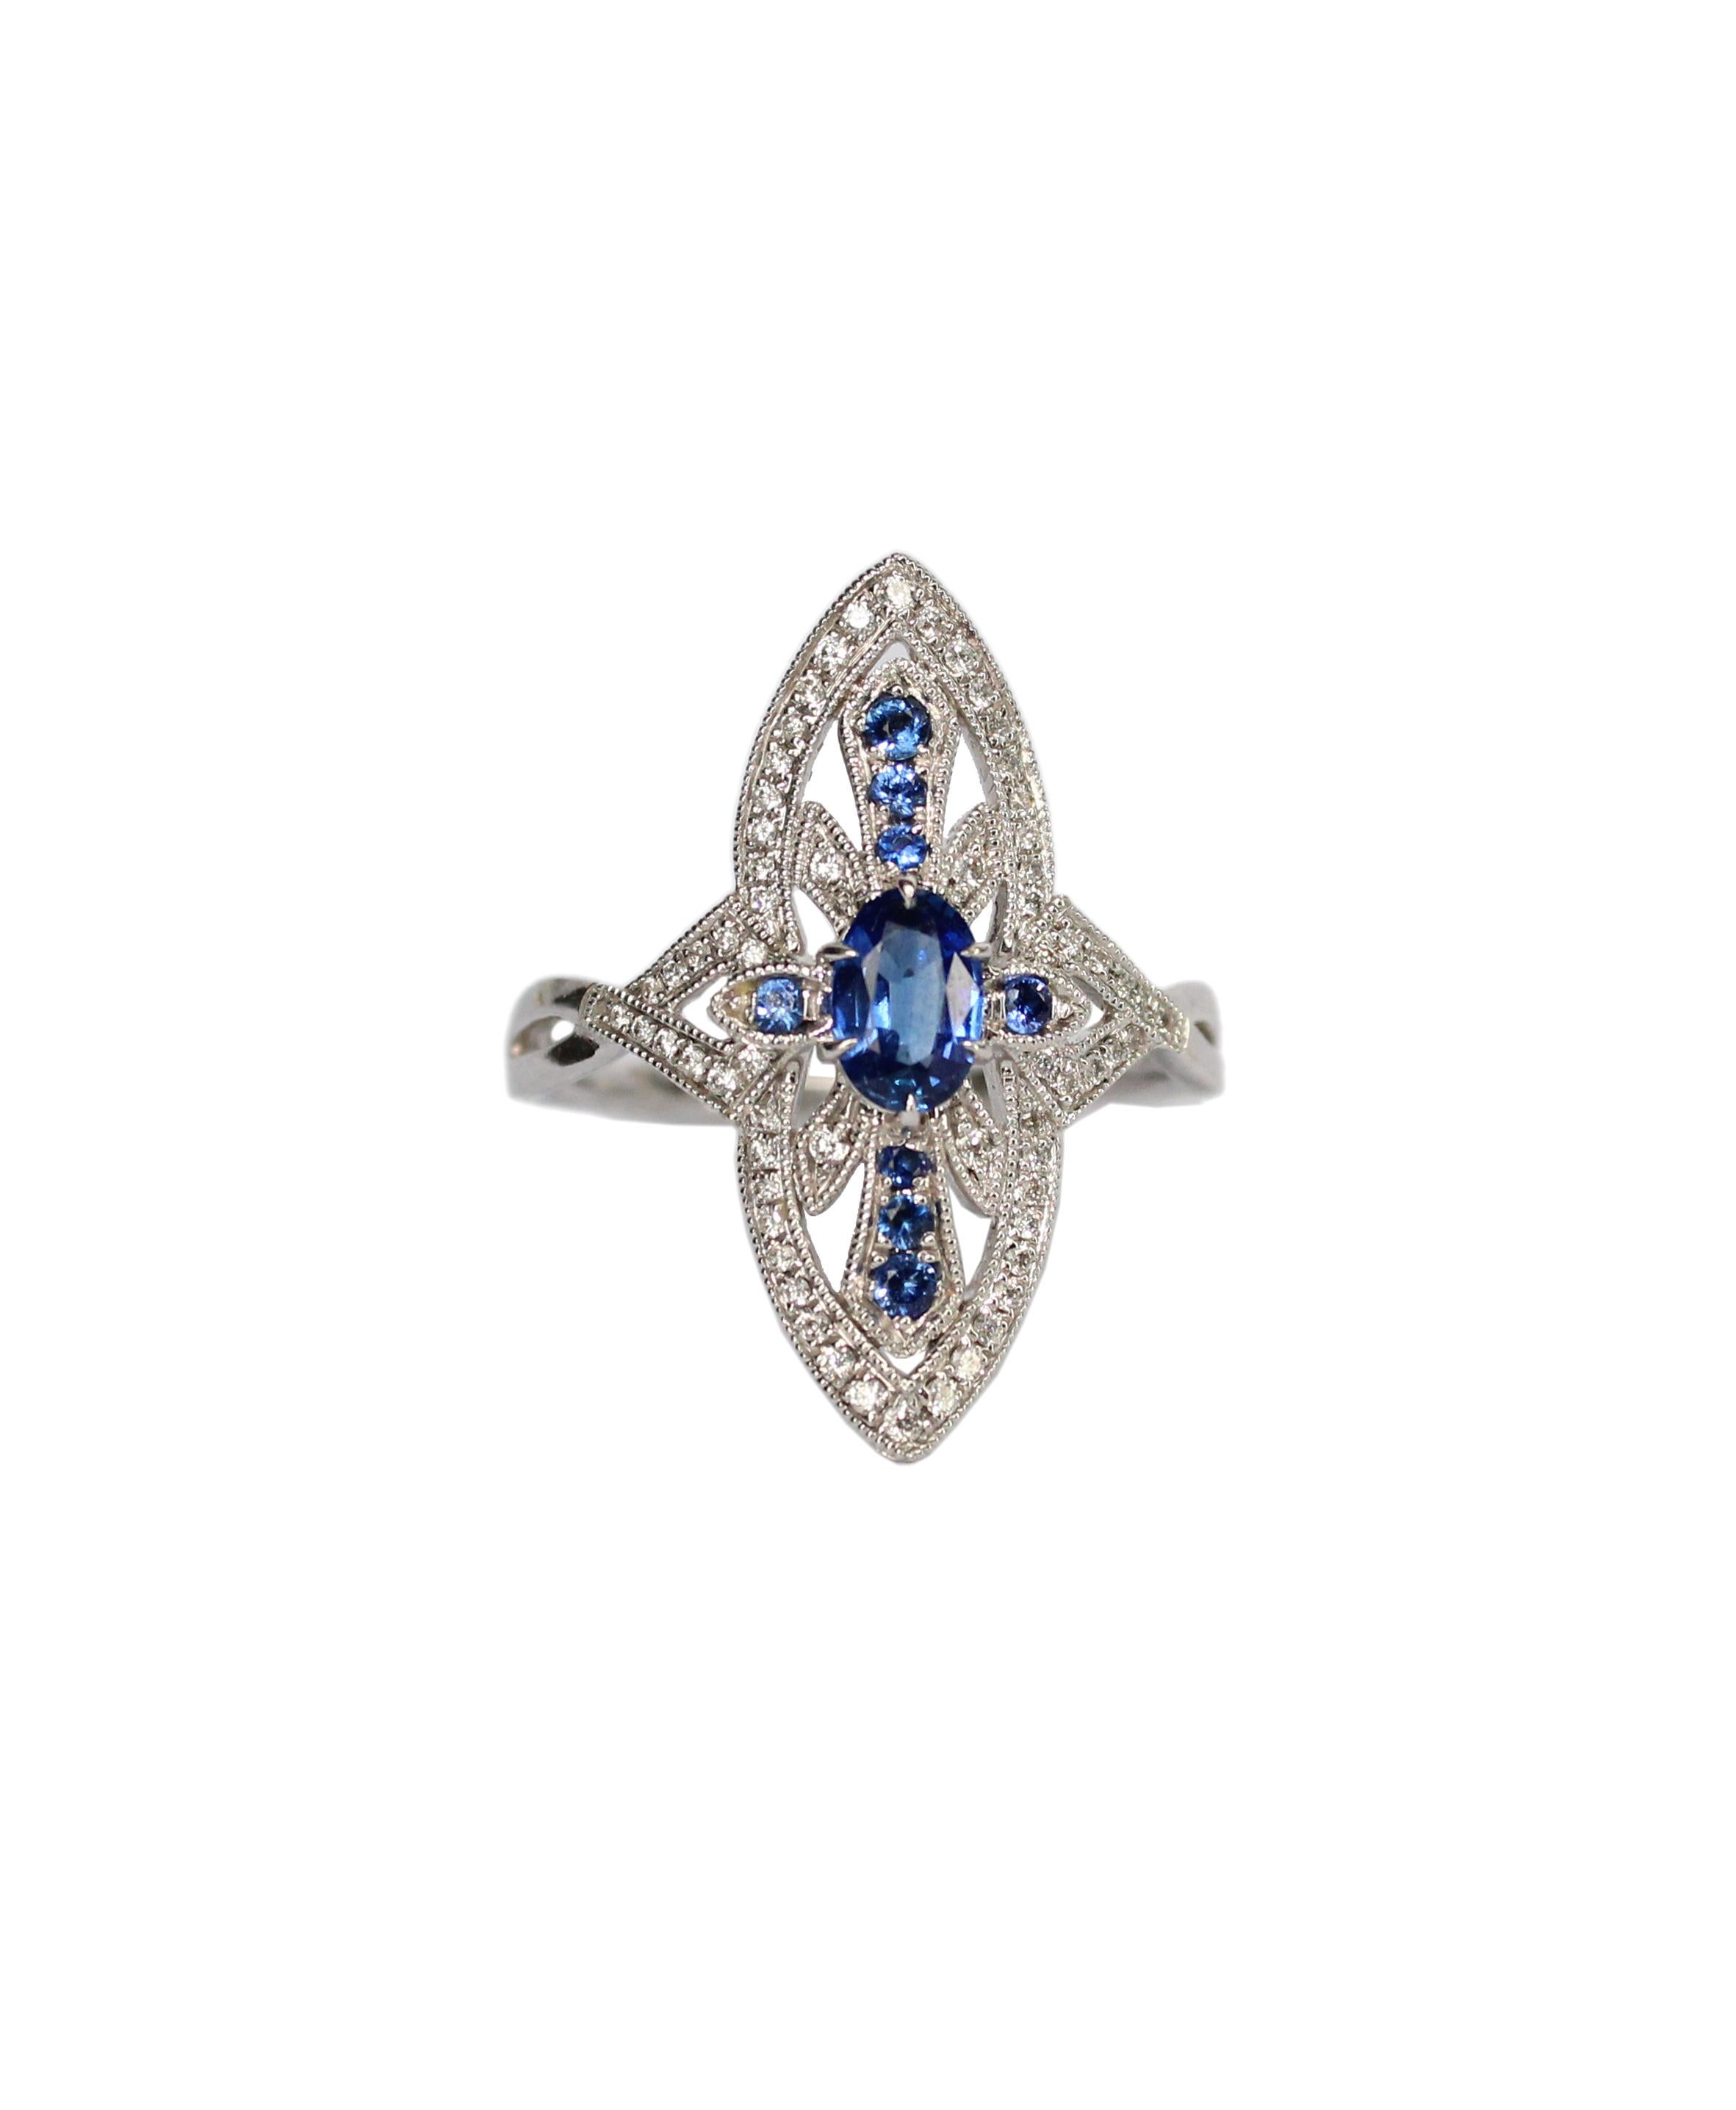 Art-Deco inspired 18K white gold ring by Tess Van Ghert London. The delicate ring is meticulously set with round diamonds and blue sapphires.

18KW 3.77 GM
8 Round Sapphires - 0.13 CT 
64 Round diamonds - 0.18 CT
1 Oval Sapphire - 0.52 CT

Comes